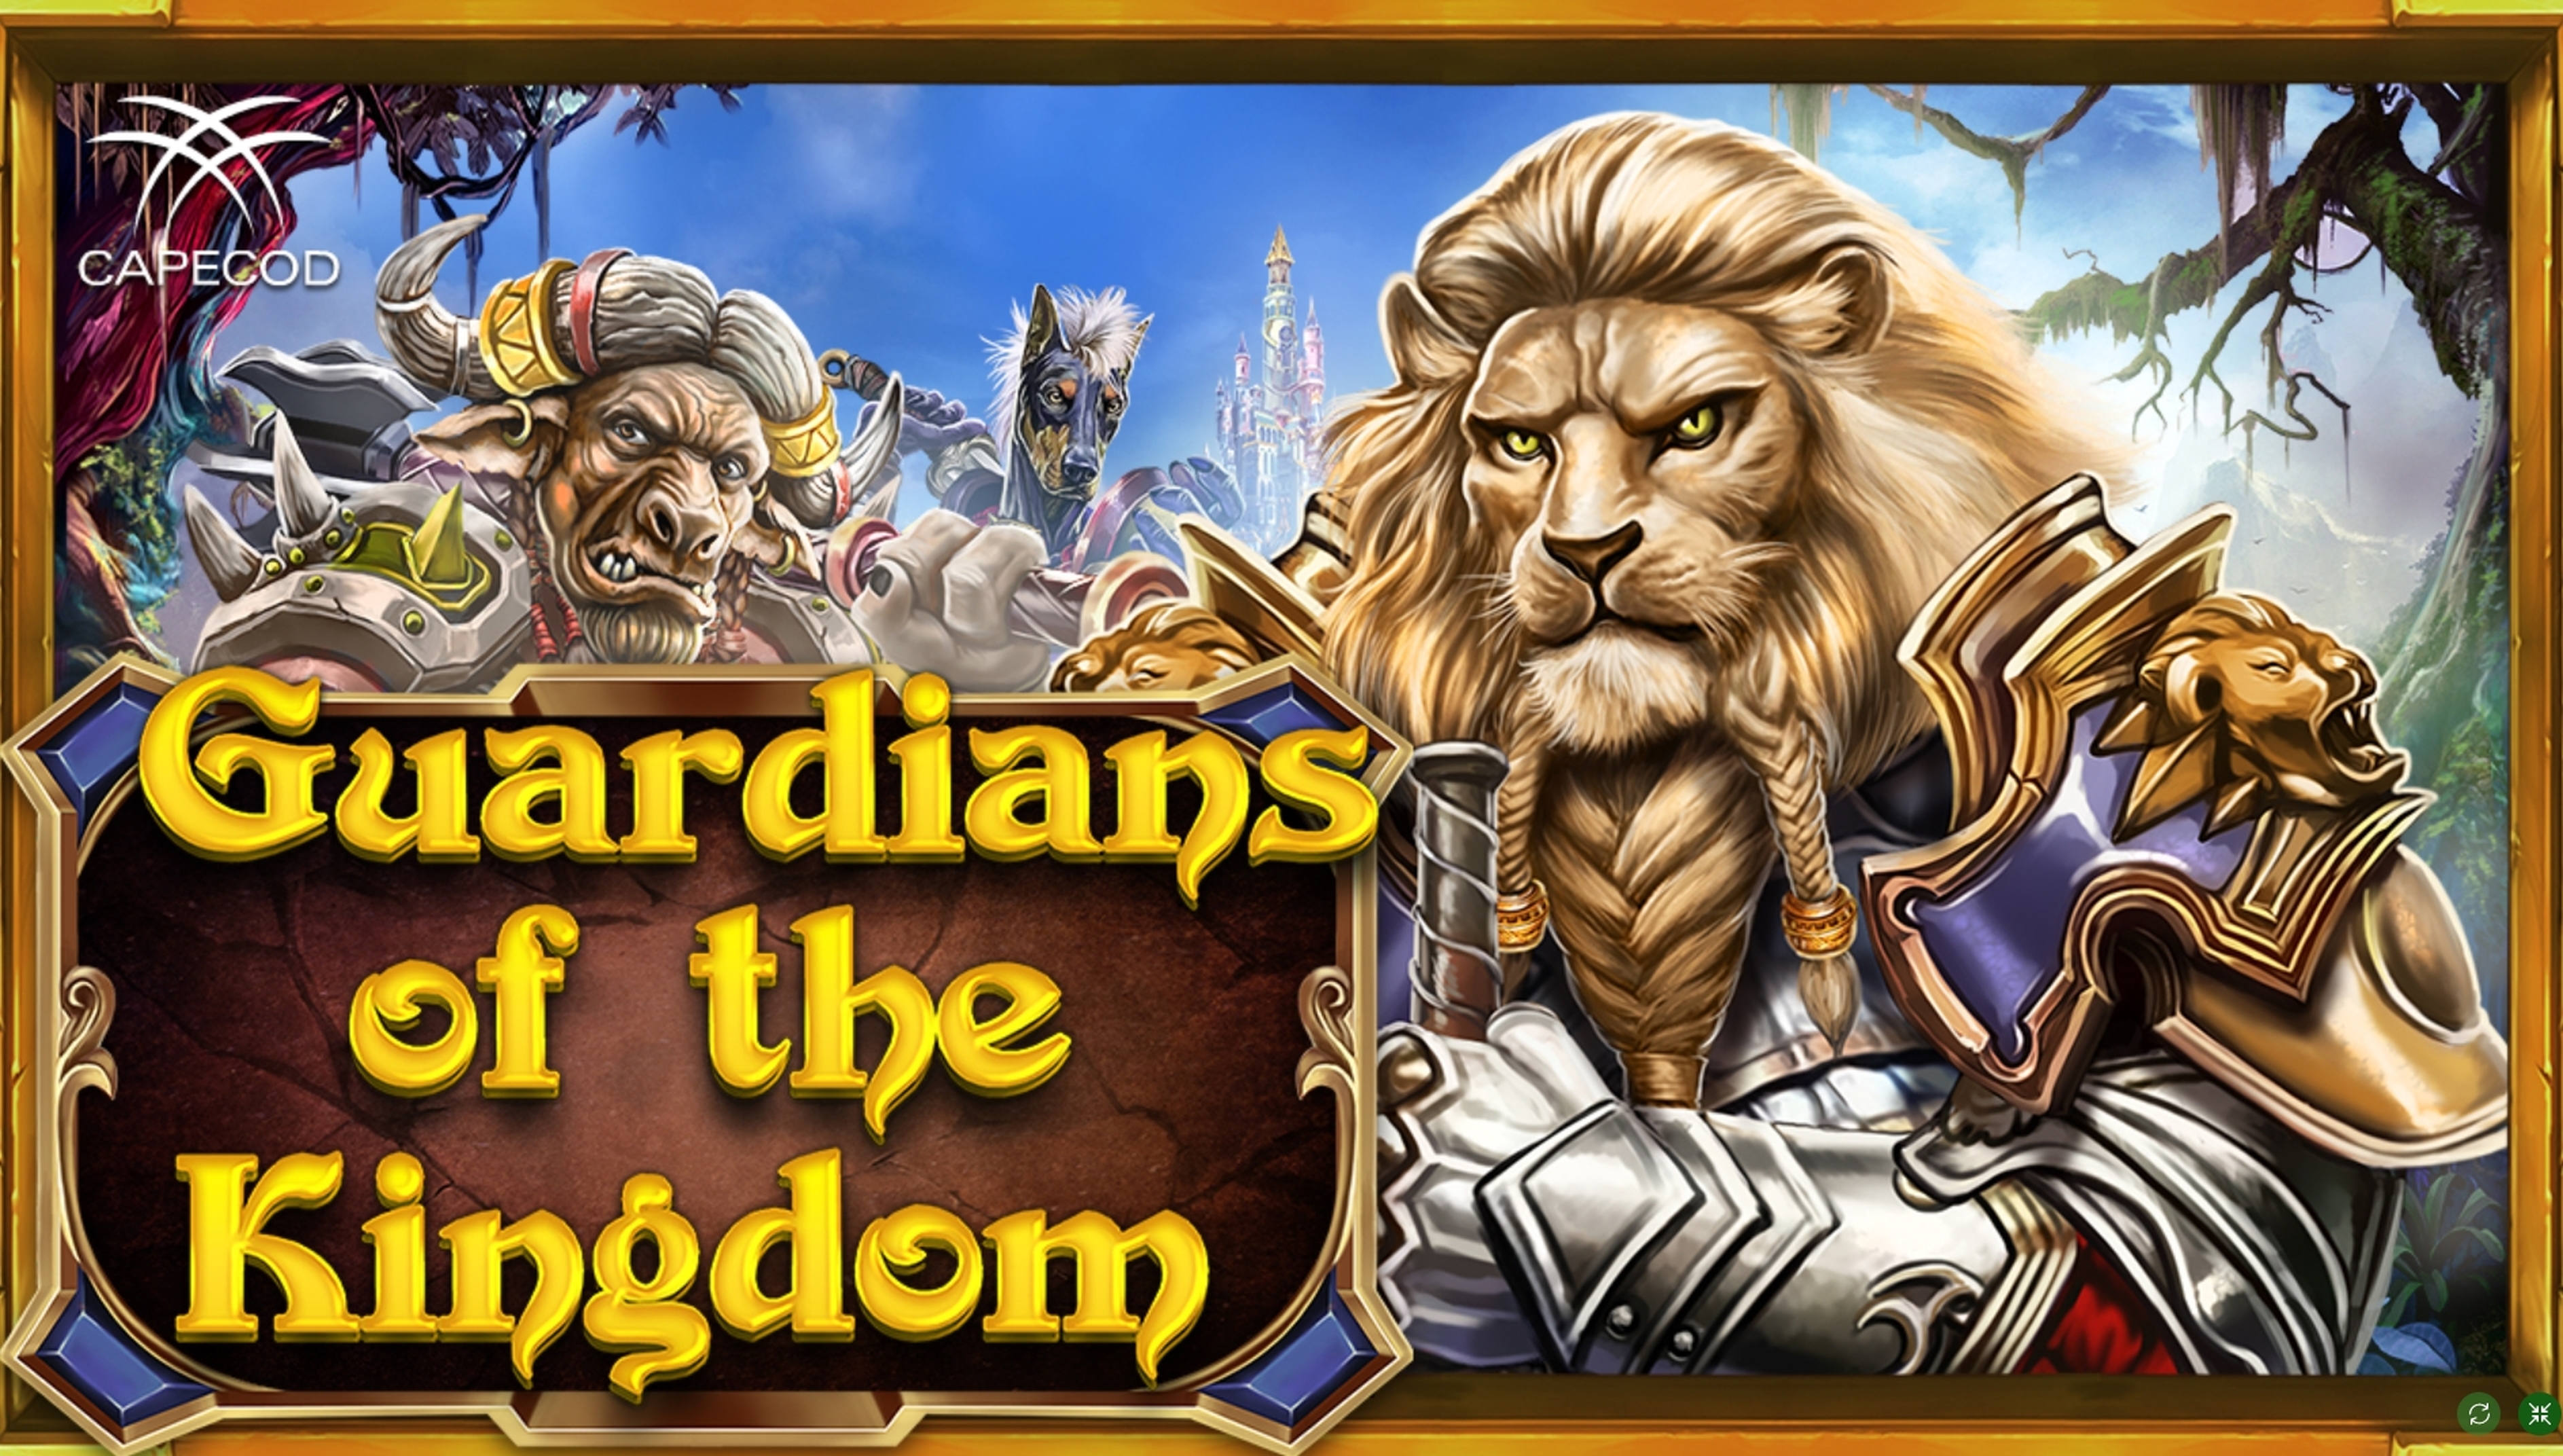 Play Guardians of the Kingdom Free Casino Slot Game by Capecod Gaming